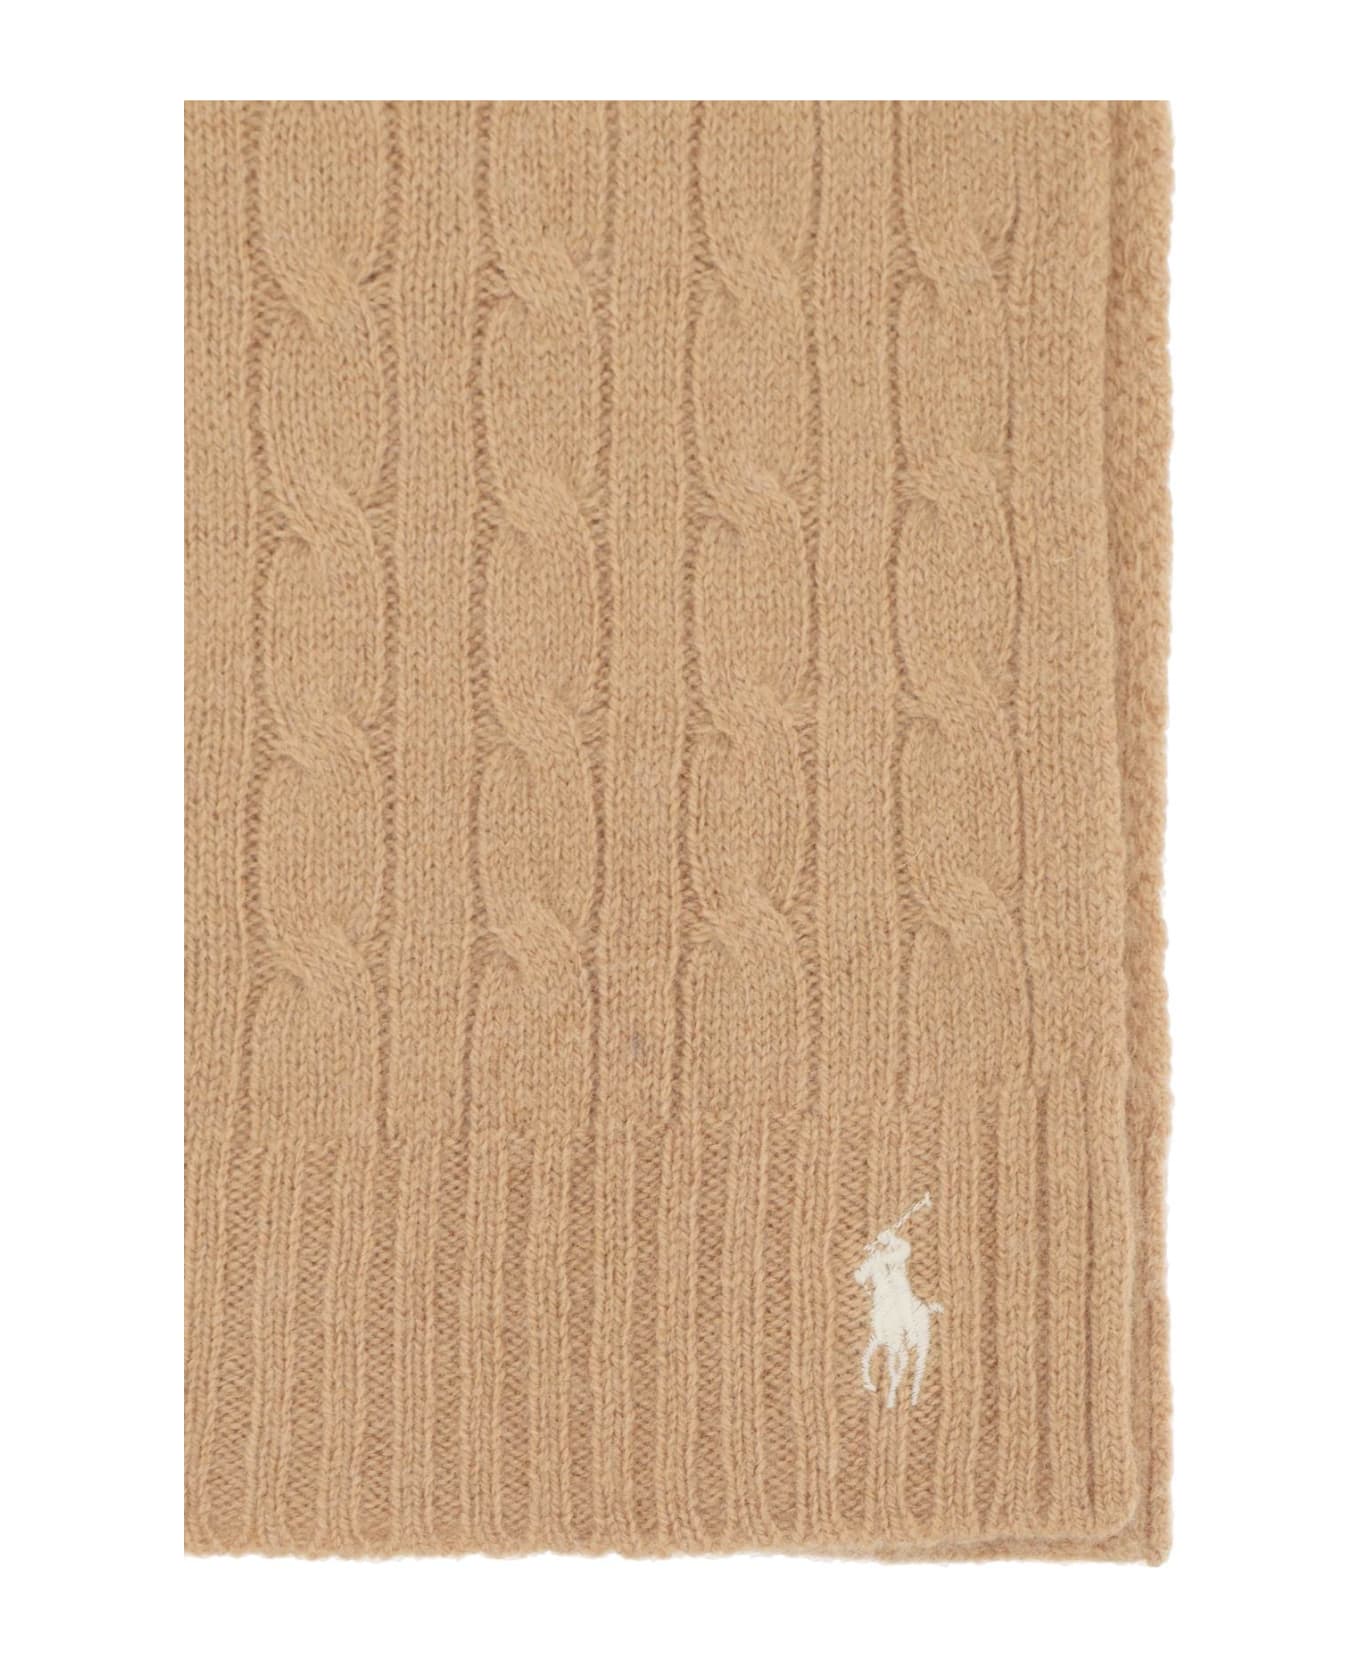 Polo Ralph Lauren Wool And Cashmere Cable-knit Scarf - CAMEL (Beige)